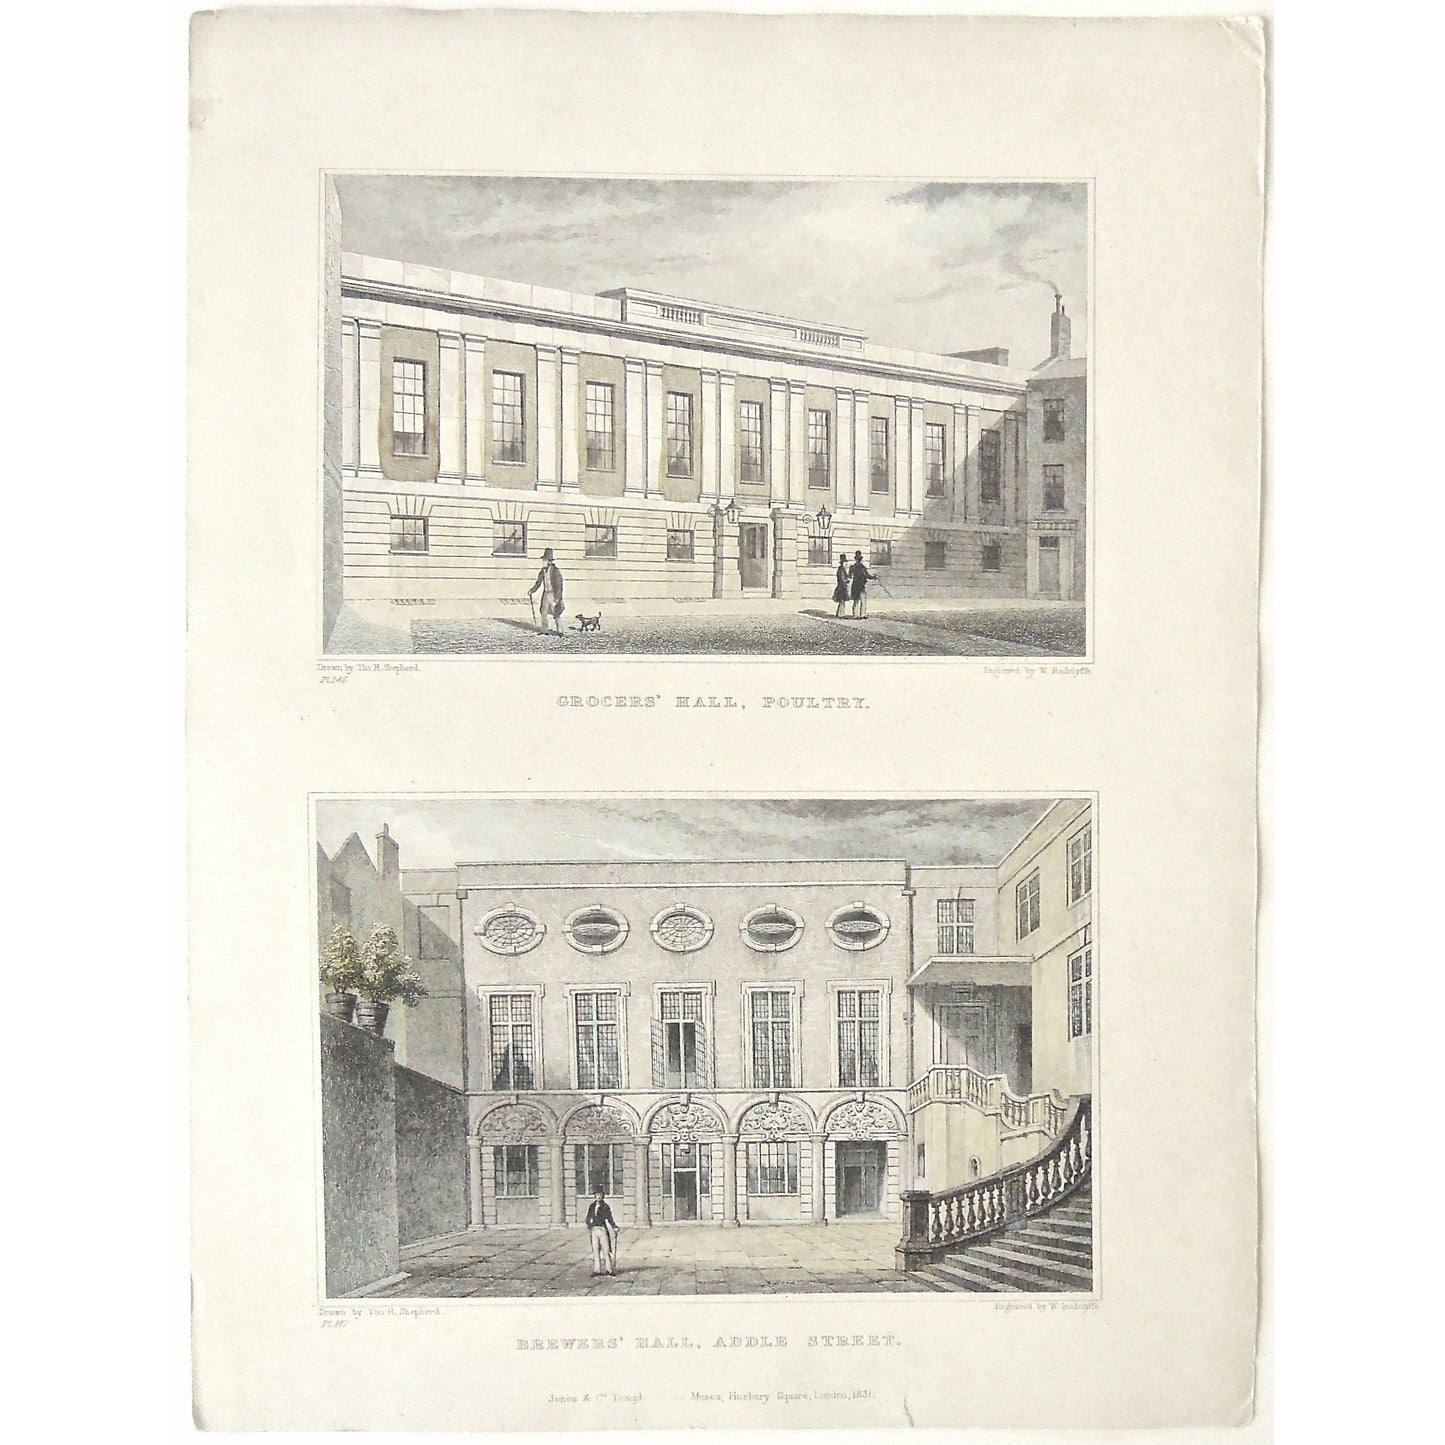 Grocers' Hall, Poultry.  (S2-50a)